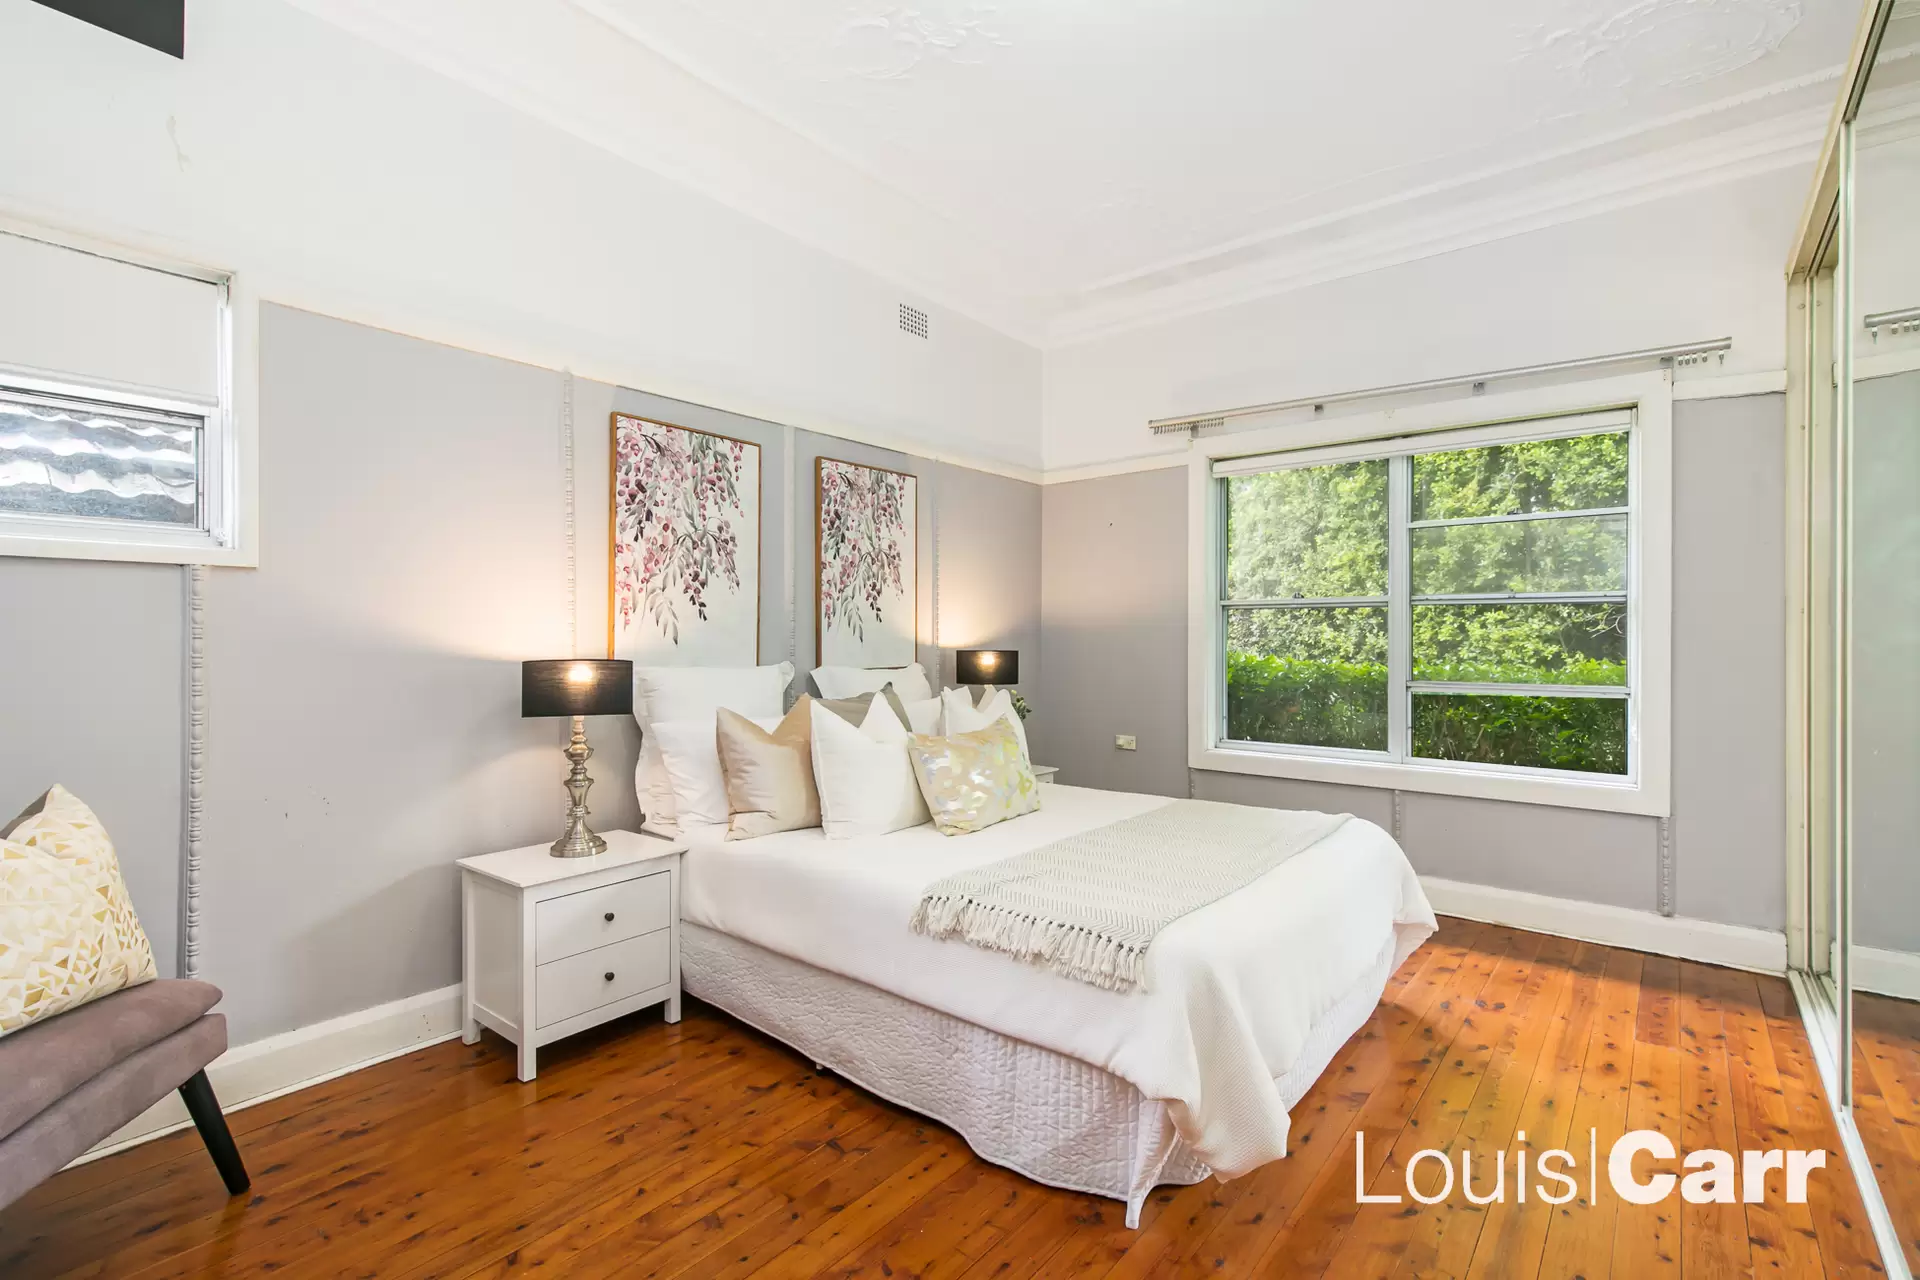 Photo #8: 17 Darlington Drive, Cherrybrook - Sold by Louis Carr Real Estate